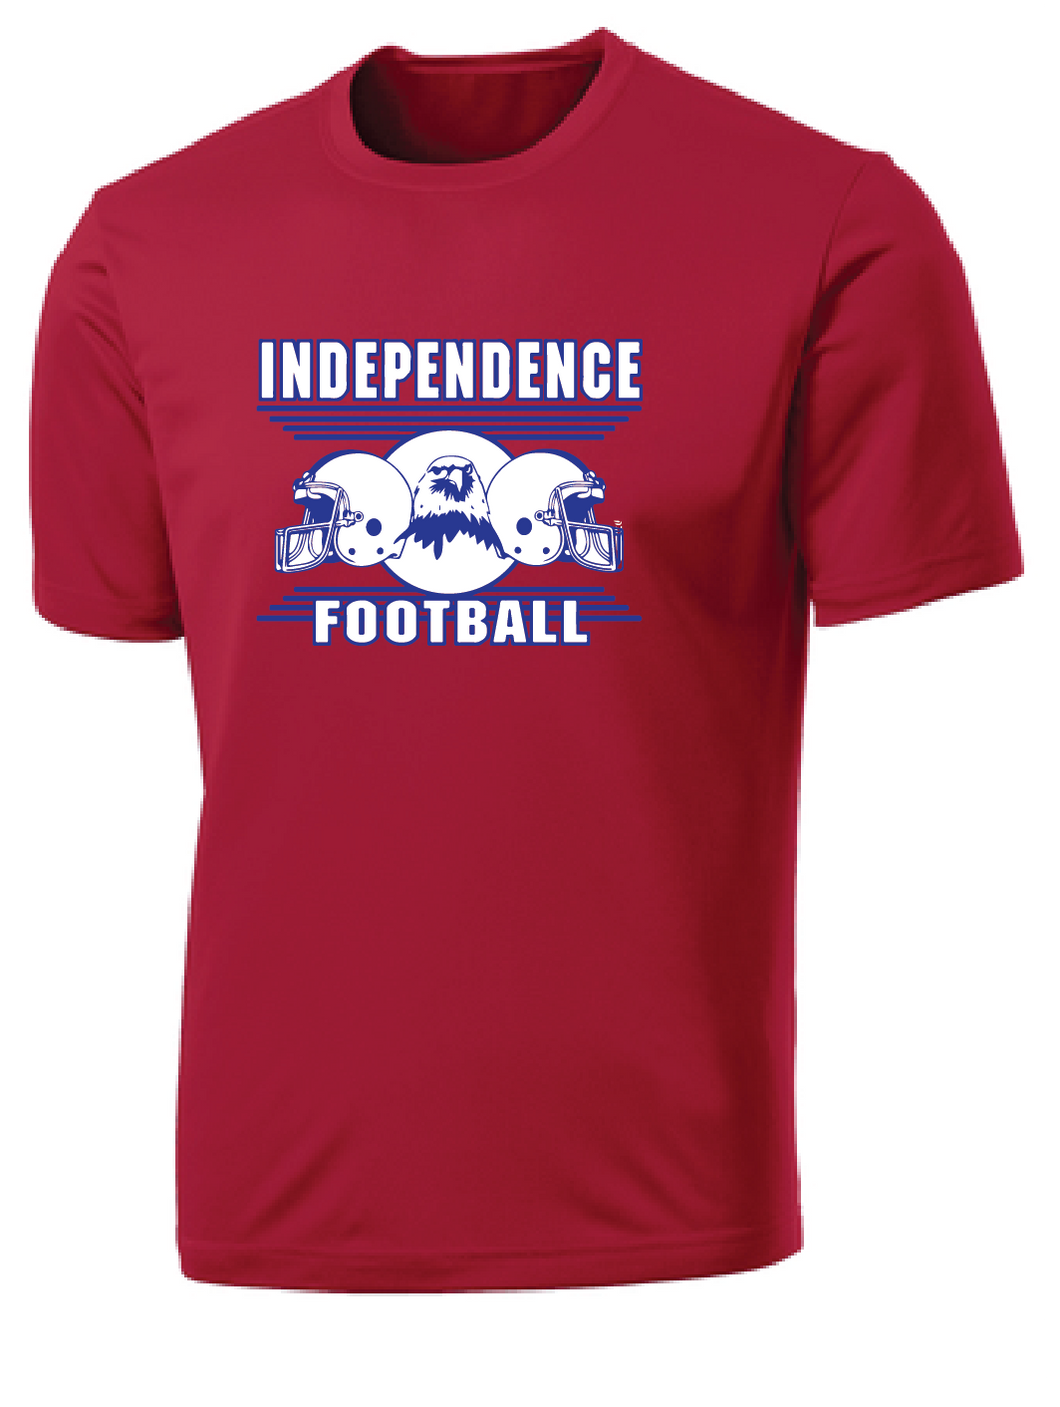 Performance T-Shirt / Red / Independence Middle Football